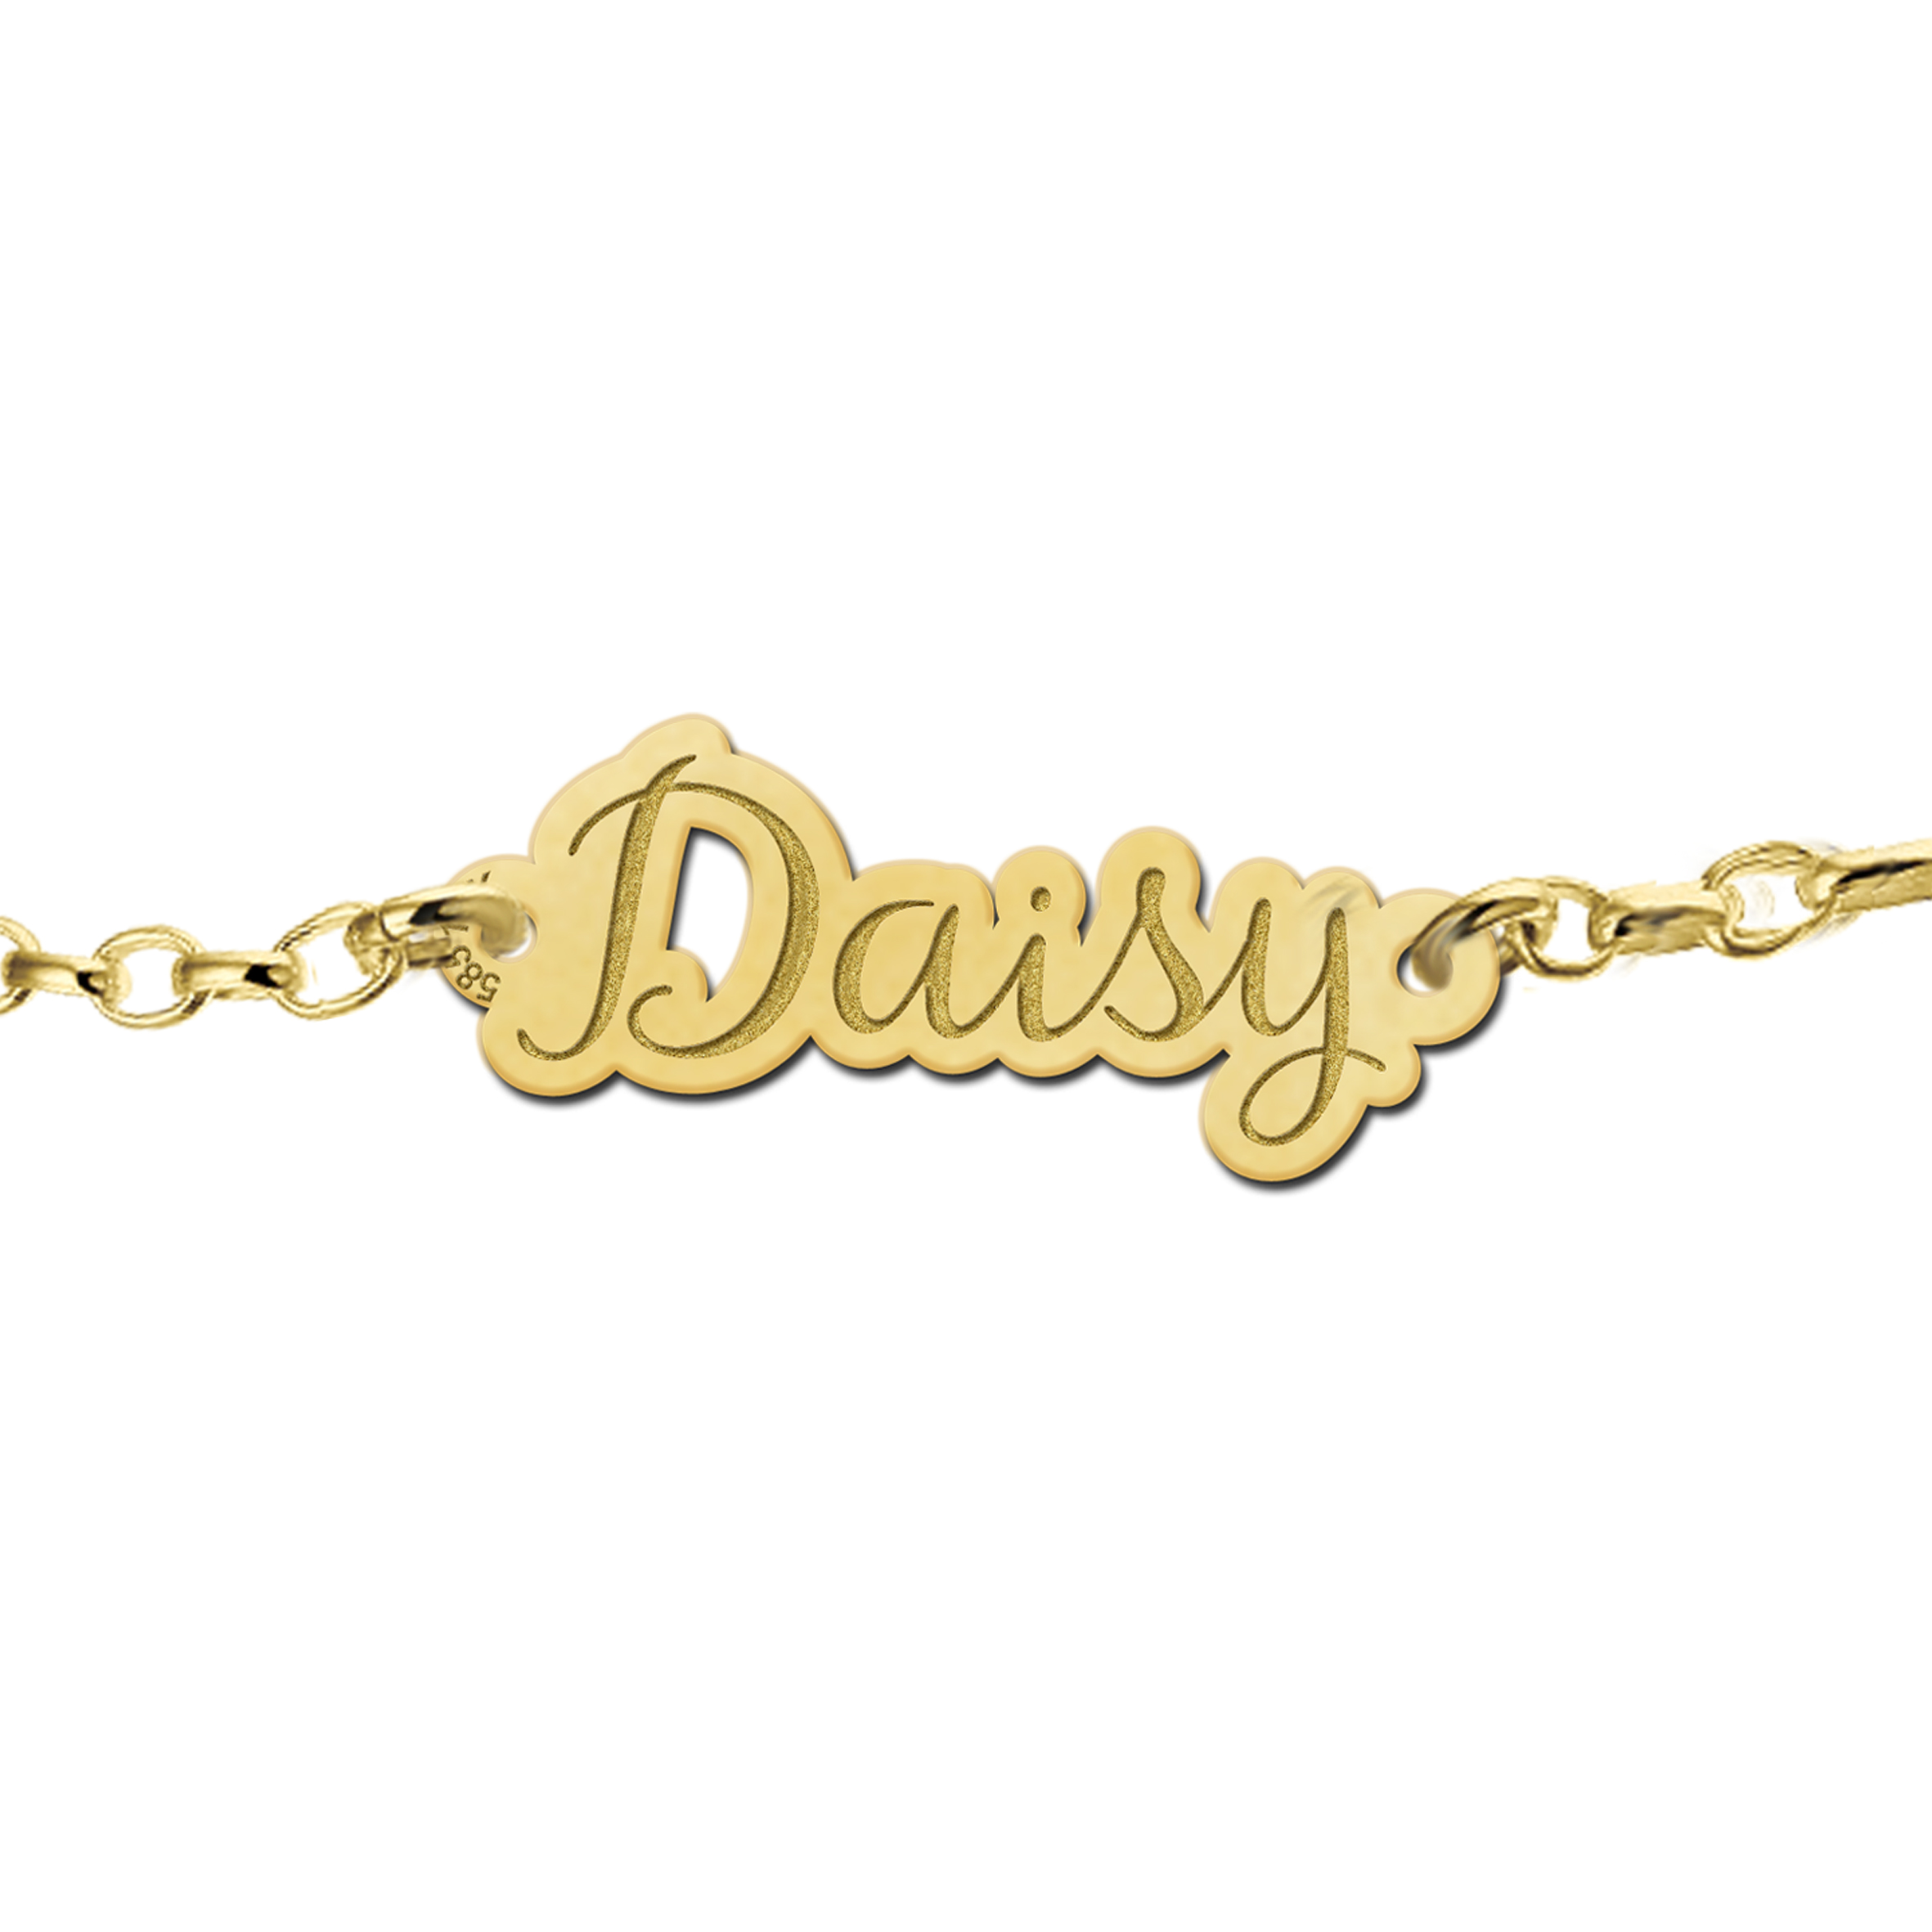 Bracelet of gold with name